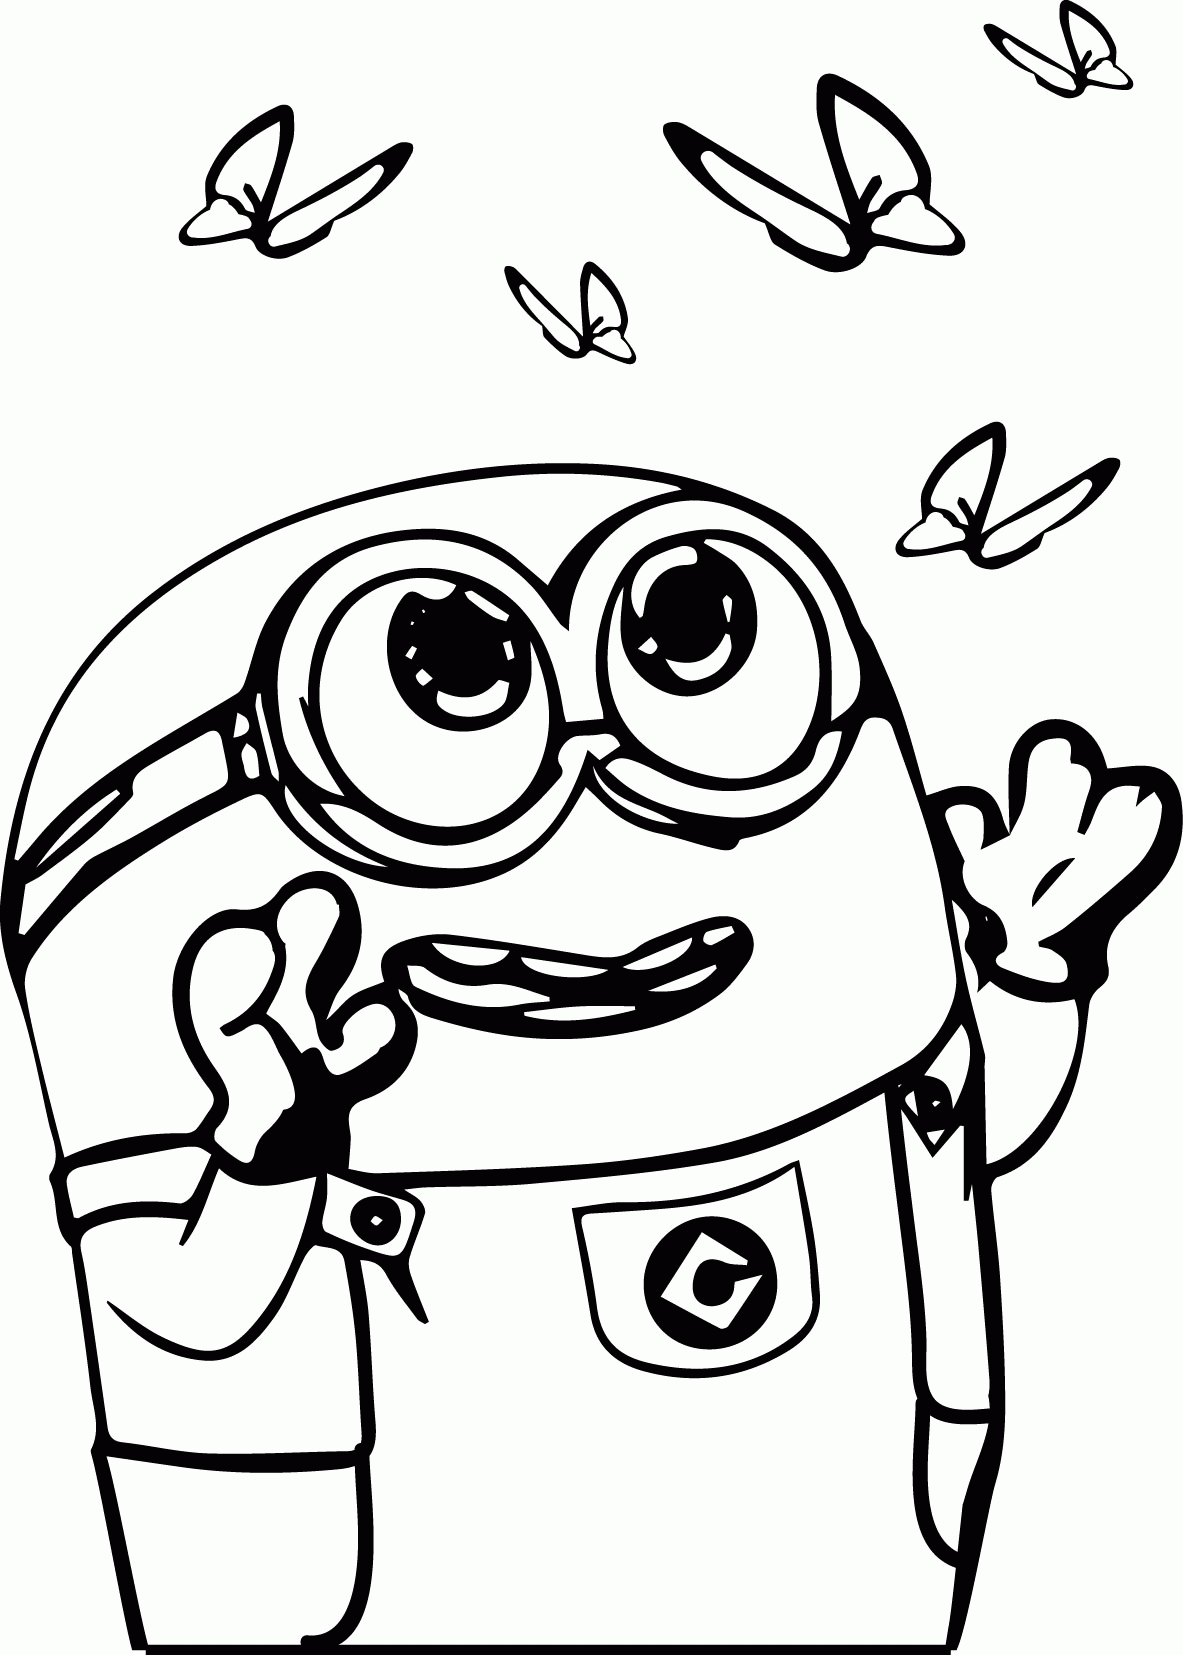 minions pictures to colour old minion coloring page wecoloringpagecom pictures colour to minions 